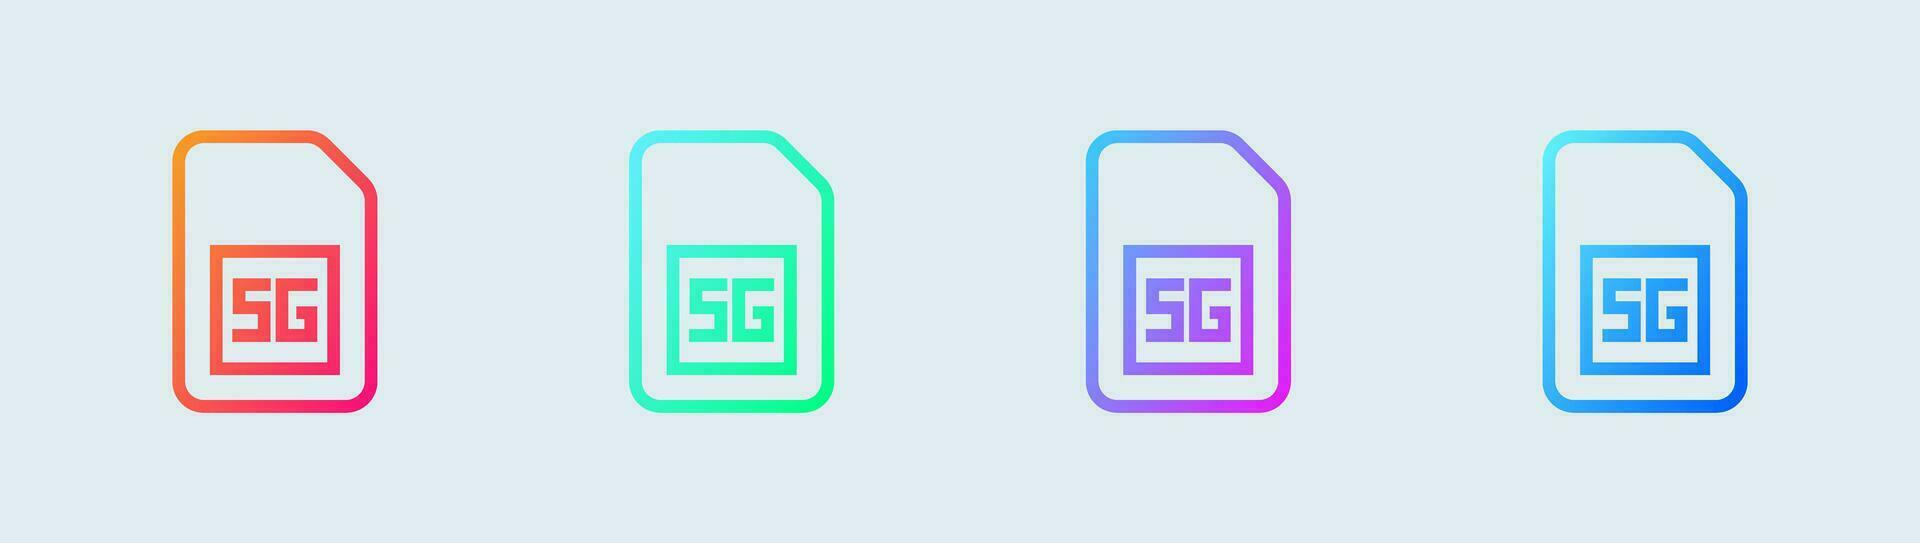 5 generation line icon in gradient colors. Network signs vector illustration.